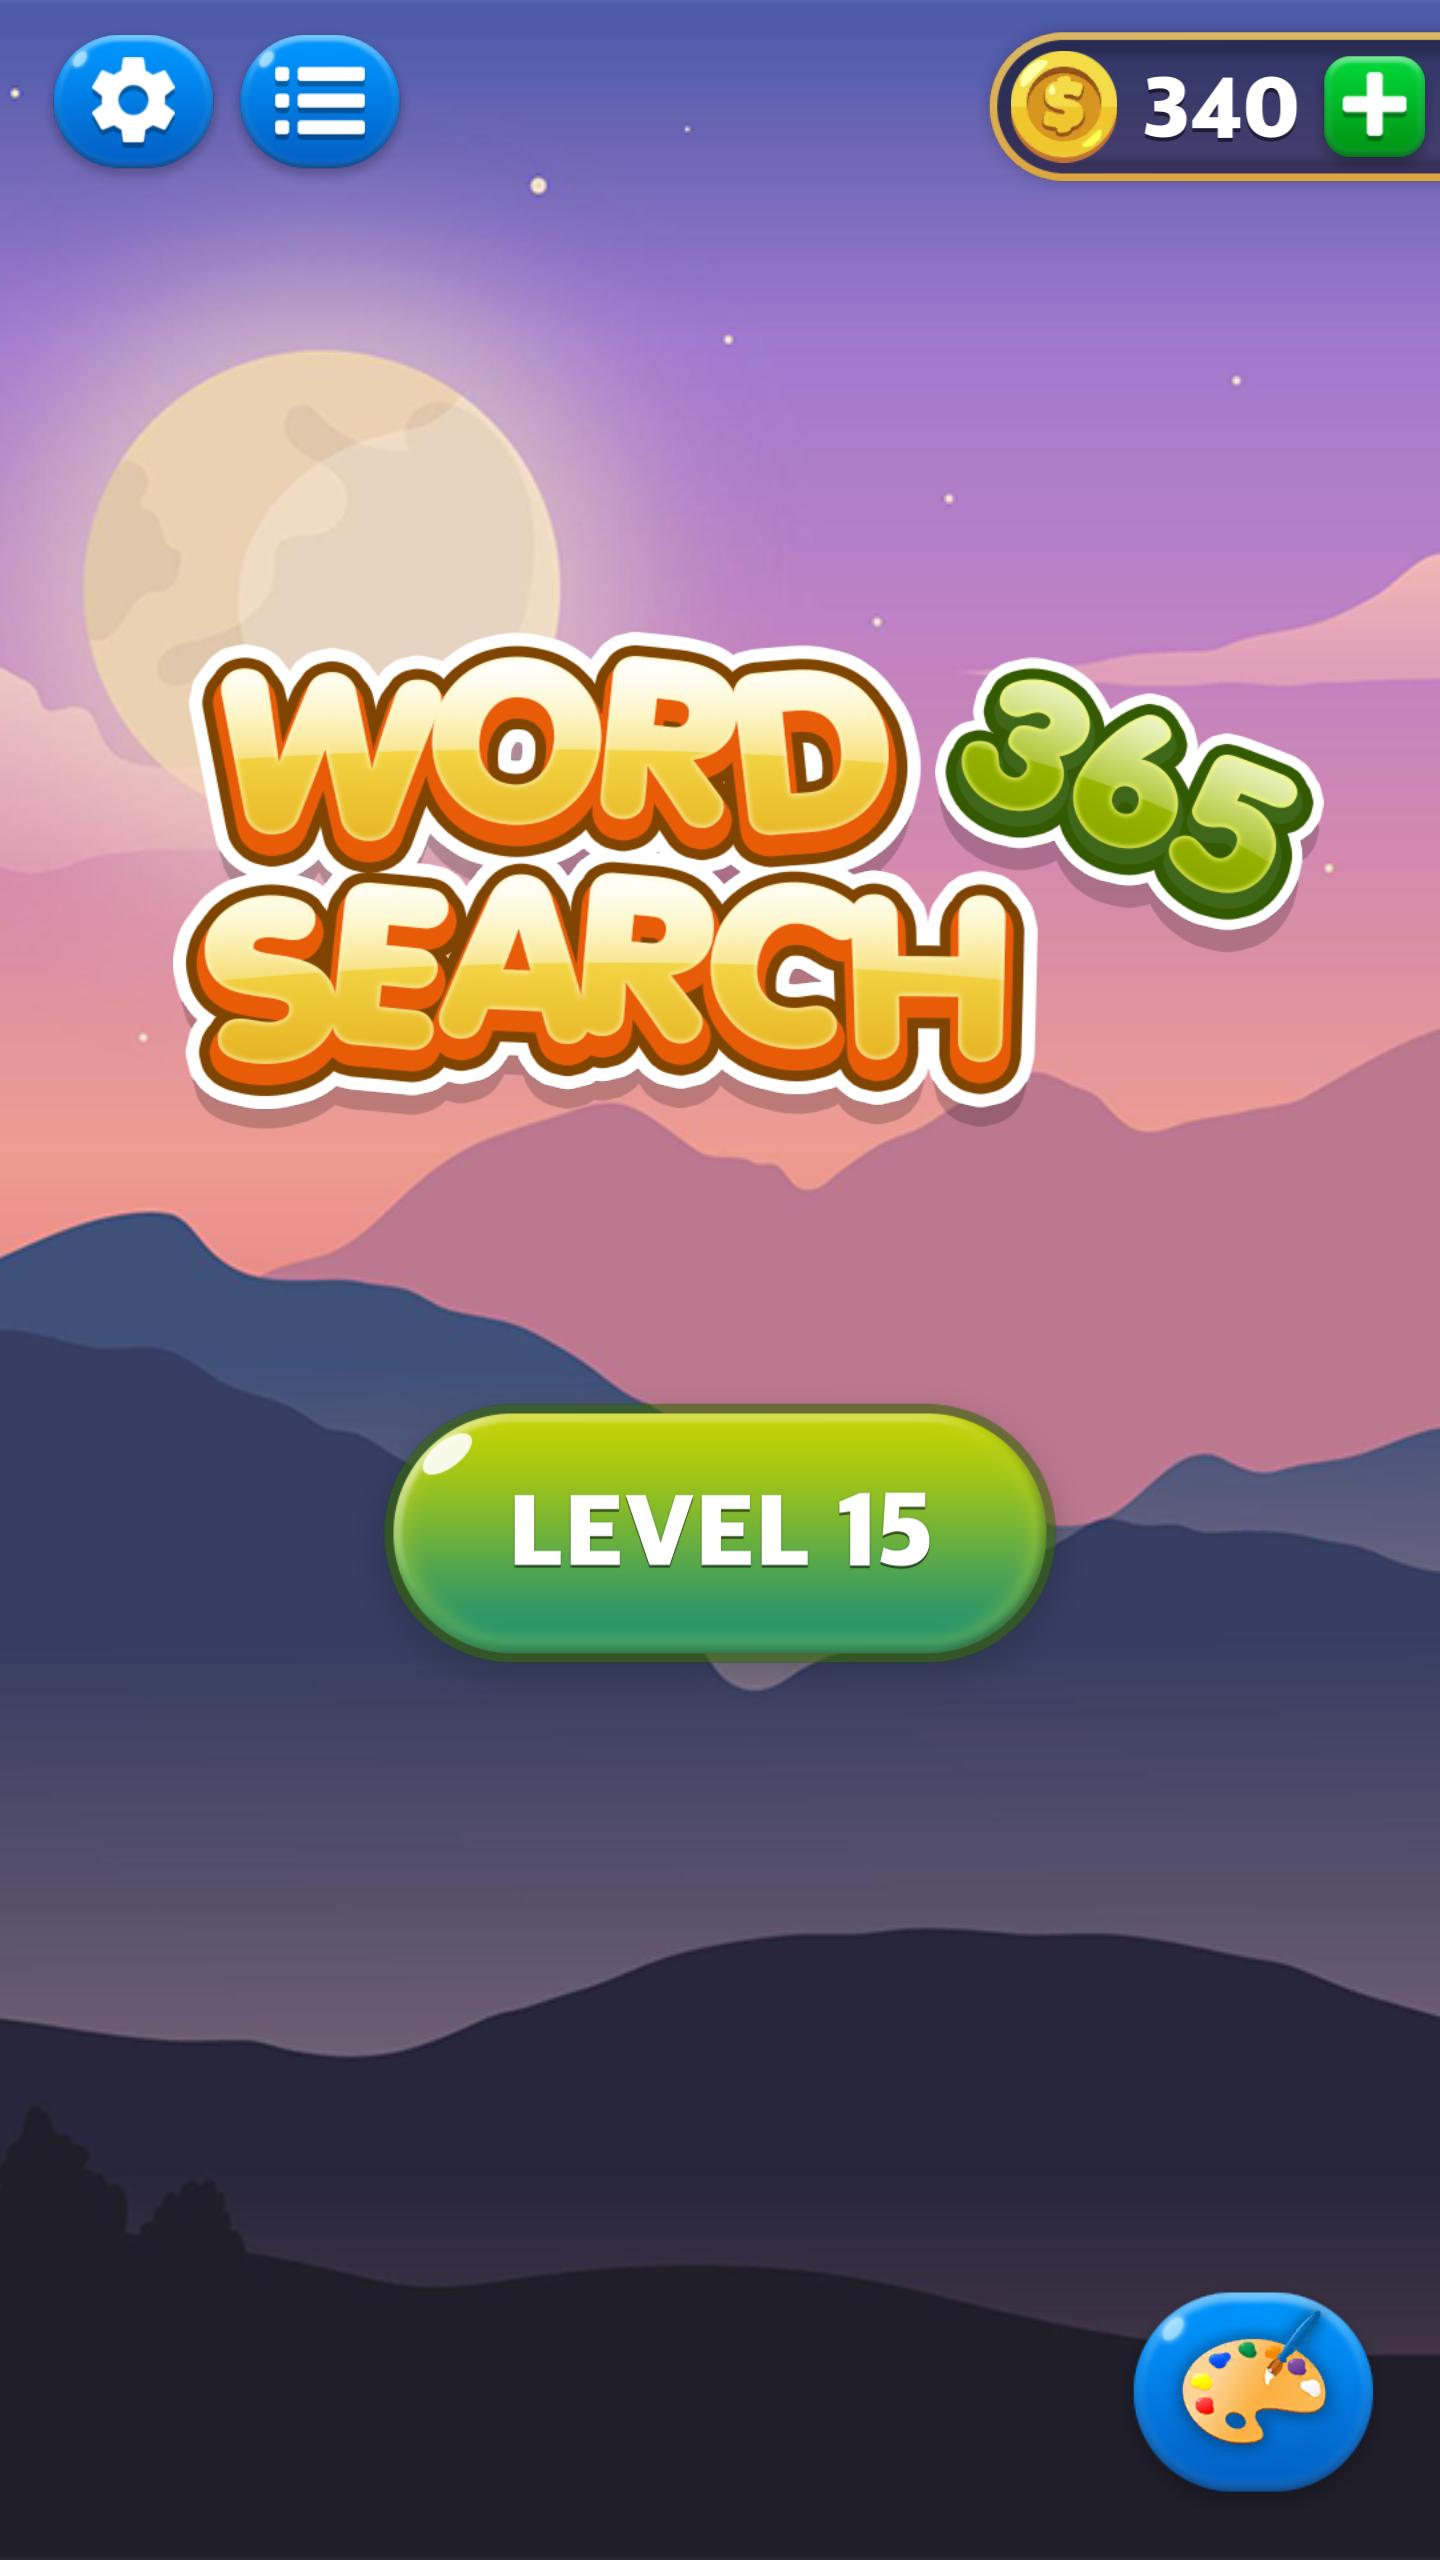 Word Search 365 Free Puzzle Casual Game 1.1.9 Screenshot 2